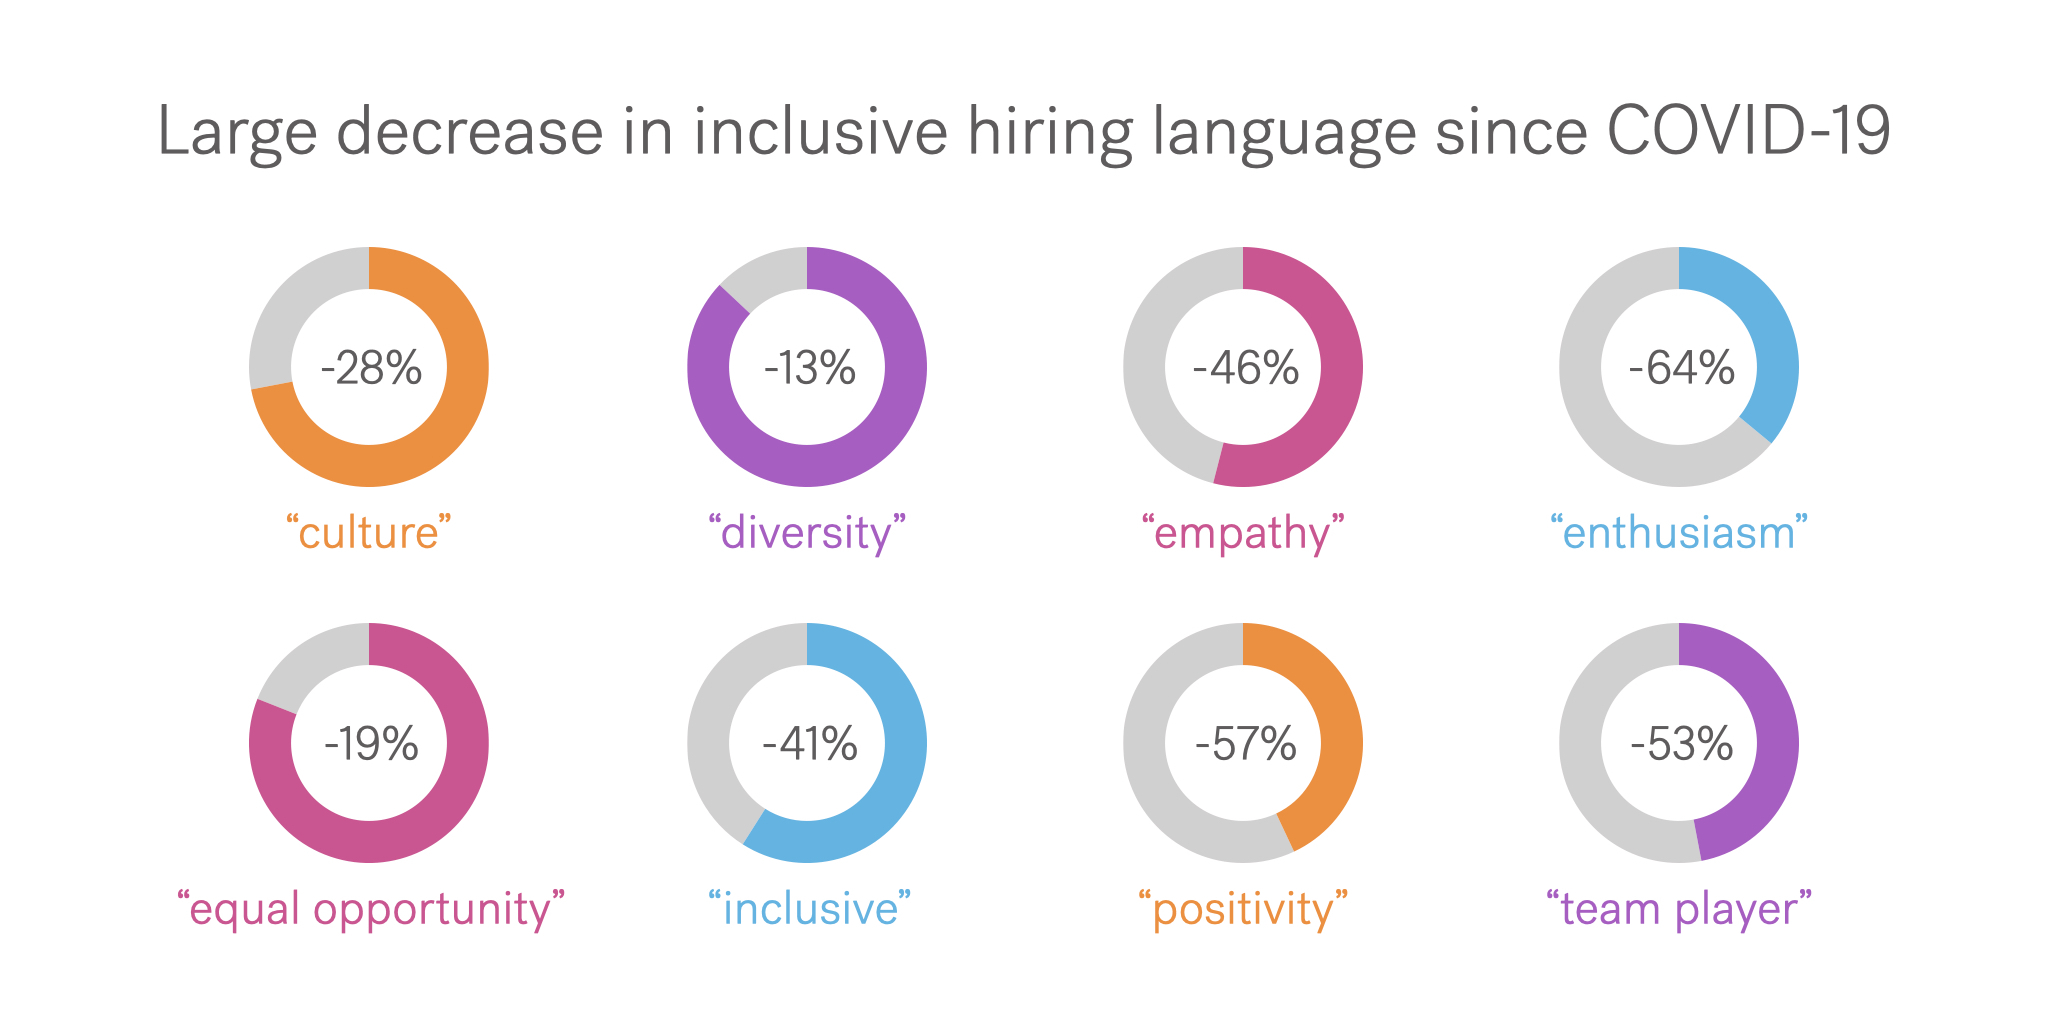 Ring graphs show large decrease in inclusive hiring language since COVID-19: "culture" (-28%), "equal opportunity" (-19%), "diversity" (-13%), "inclusive" (-41%), "empathy" (-46%), "positivity" (-57%), "enthusiasm" (-64%), "team player" (-53%)